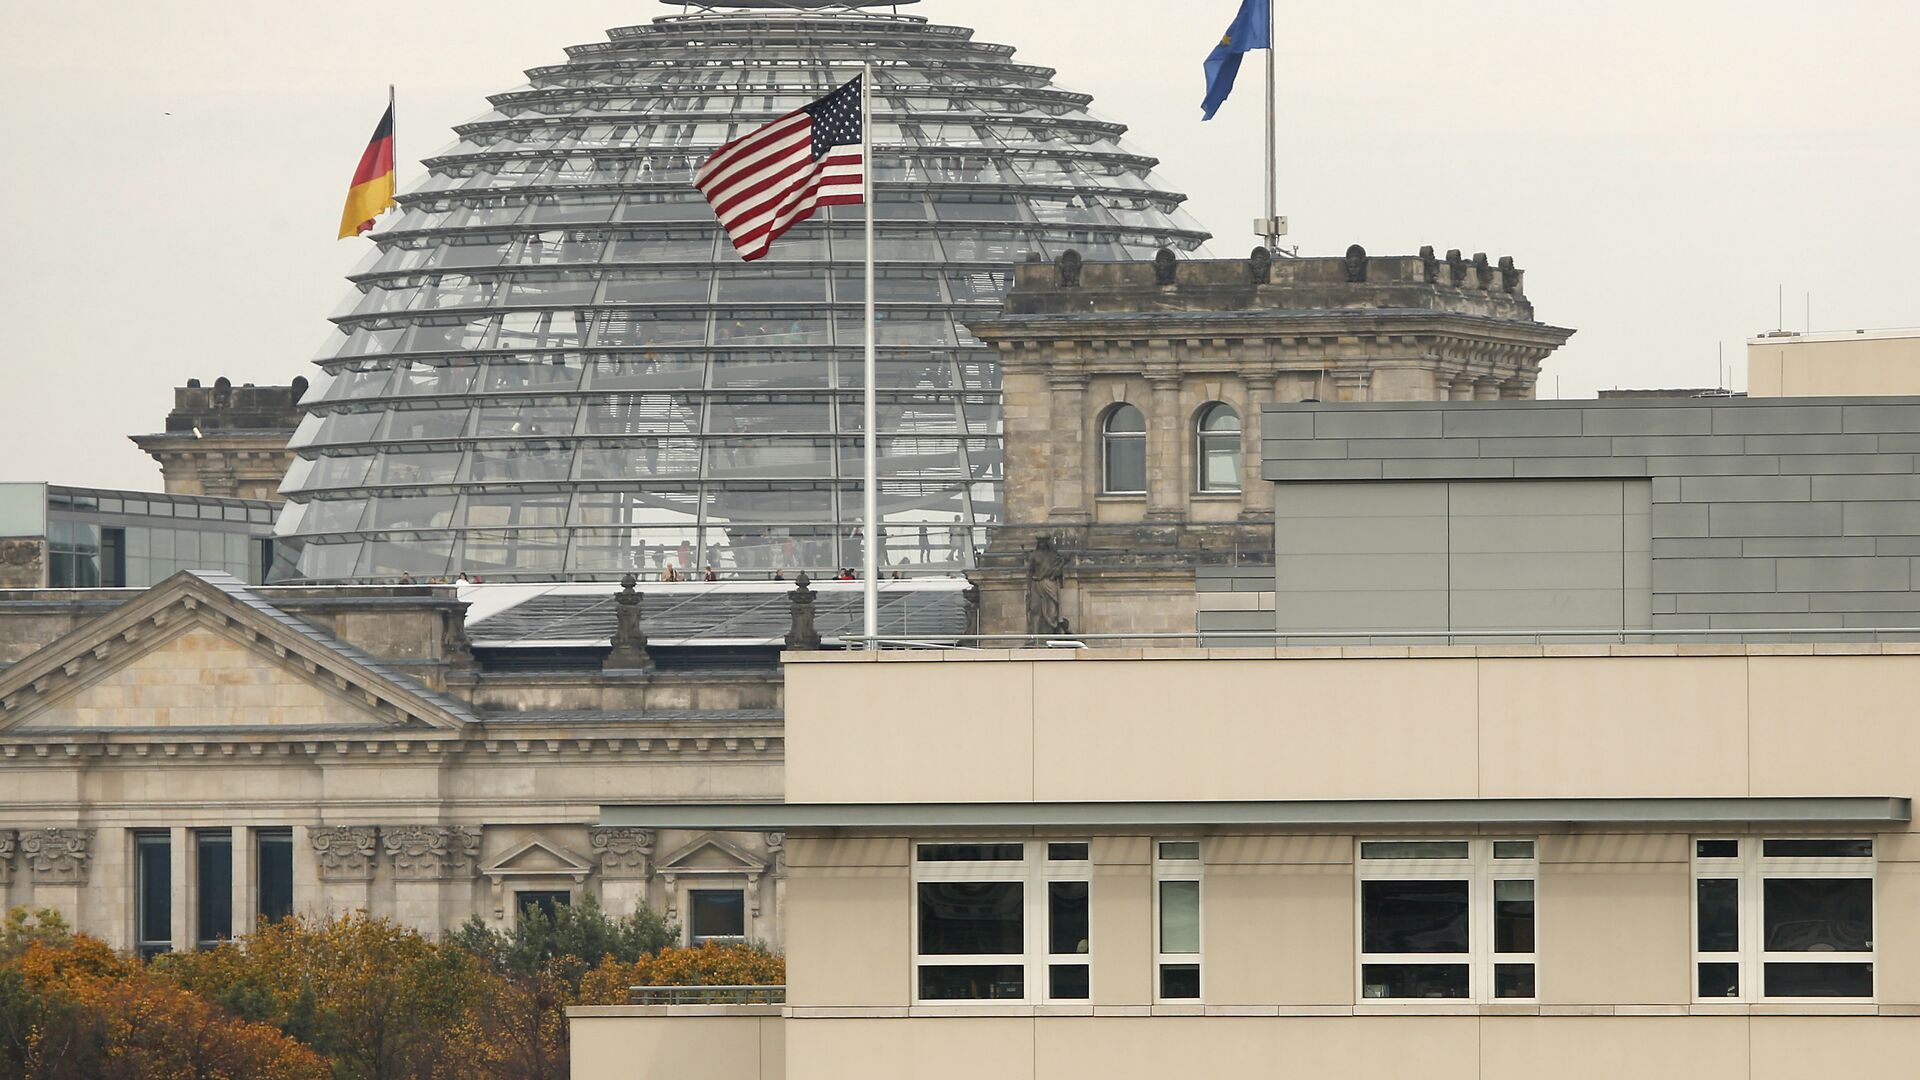 American flag flies on top of the U.S. embassy in front of the Reichstag building that houses the German Parliament, Bundestag, in Berlin, Germany (File) - Sputnik International, 1920, 21.06.2021